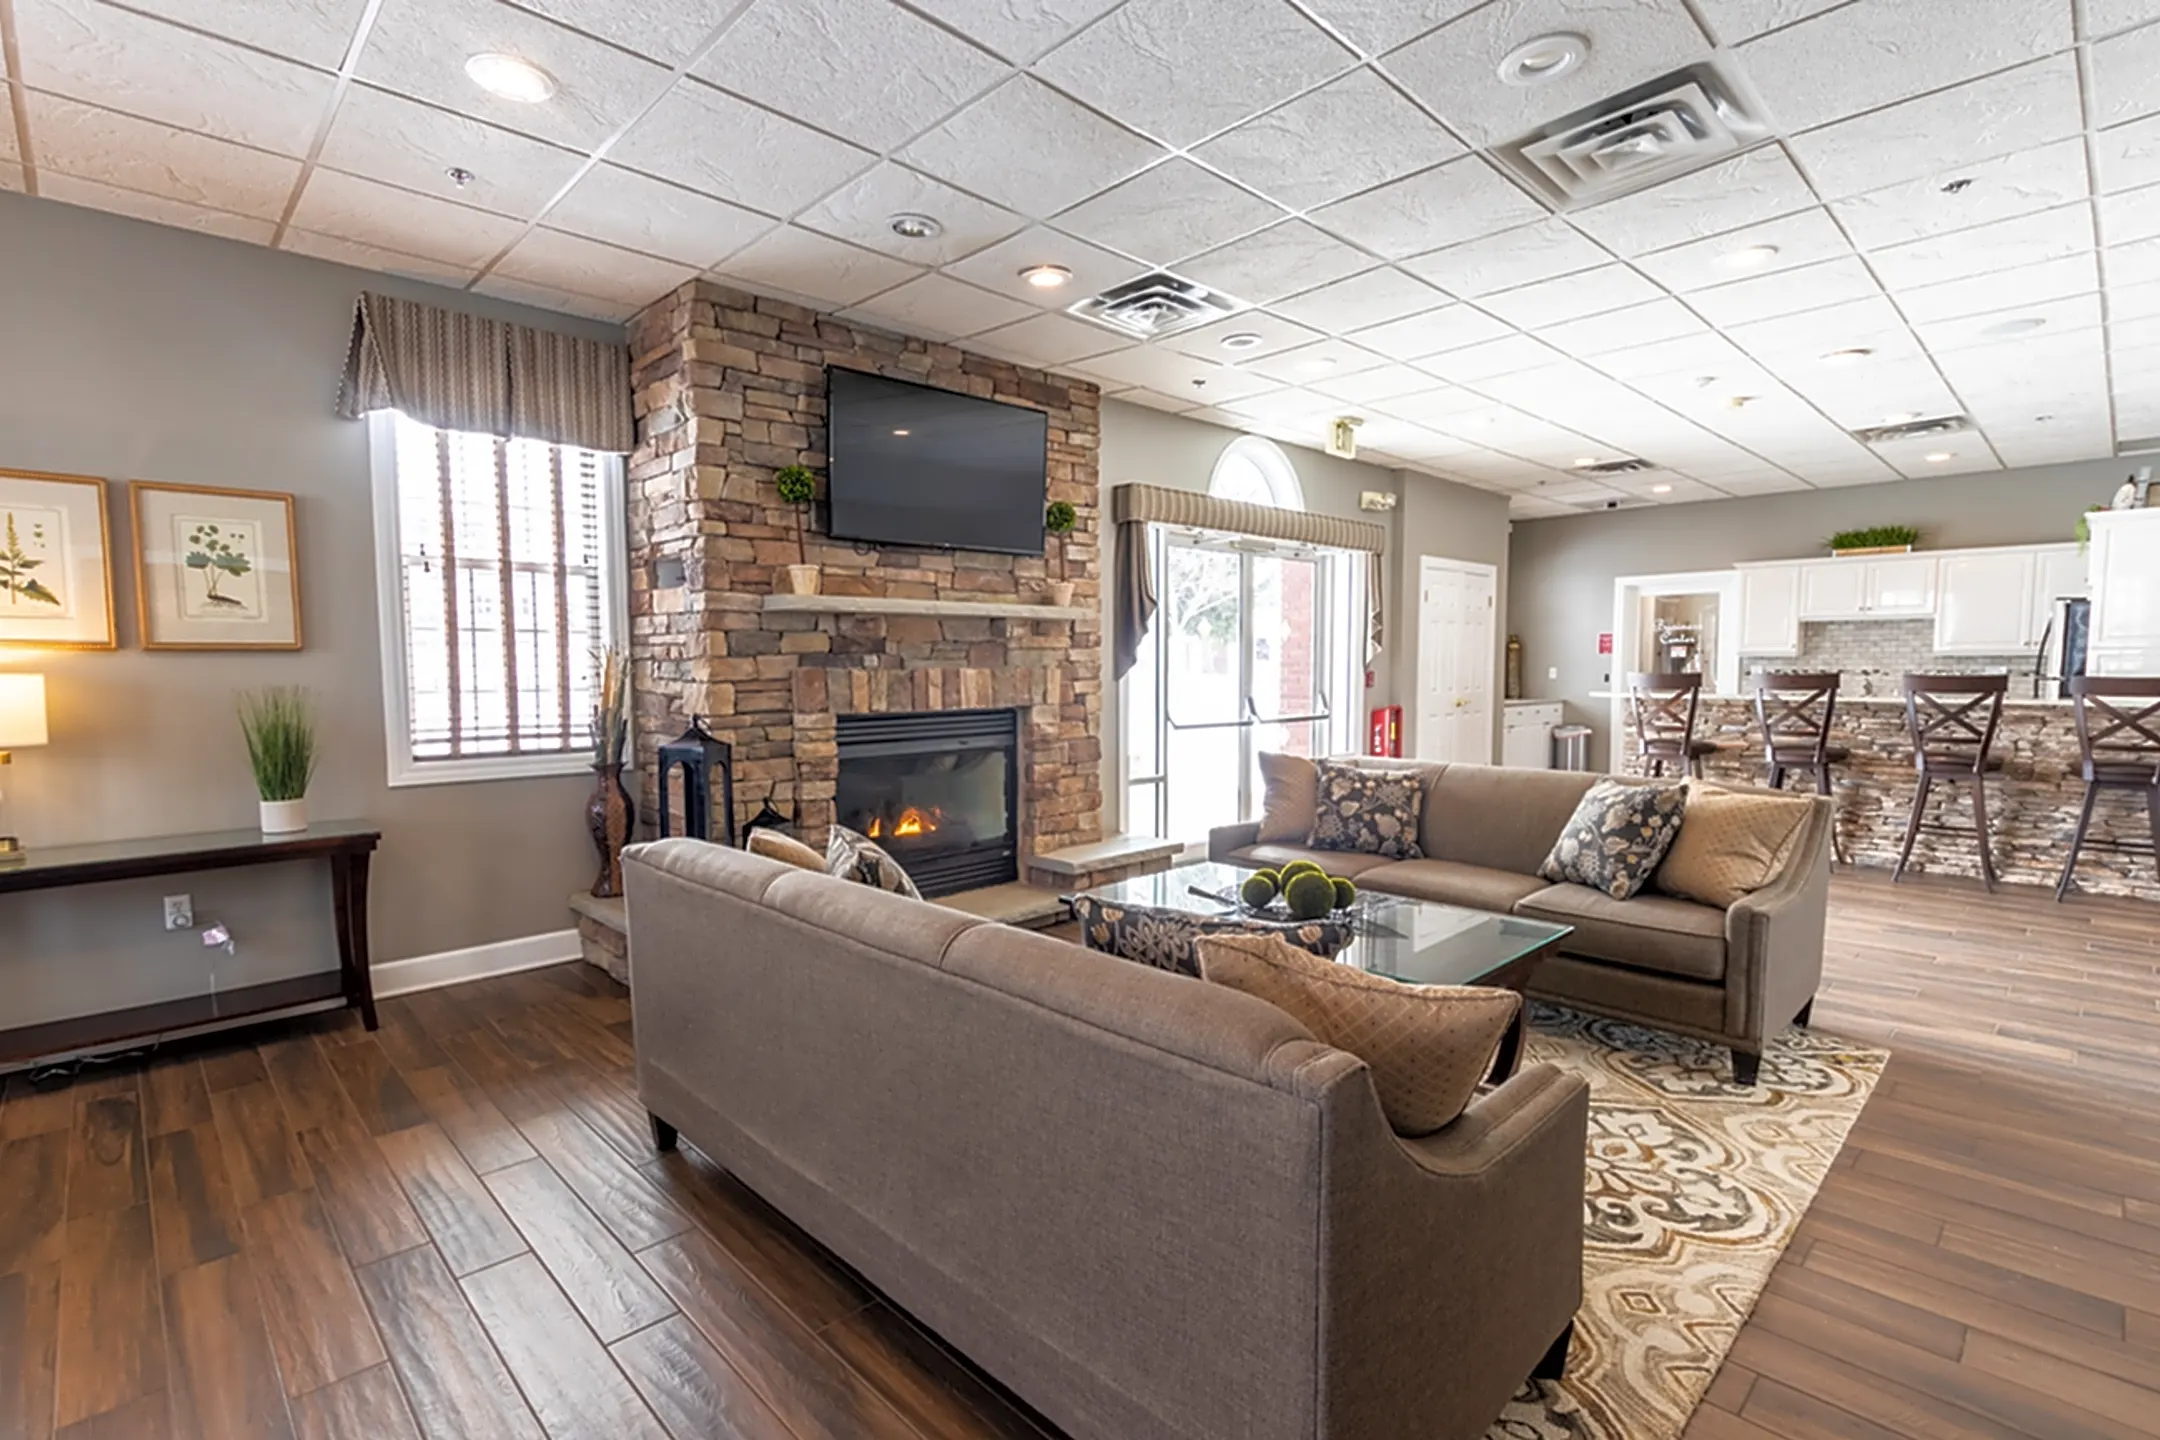 Living Room - Autumn Creek Apartments - East Amherst, NY